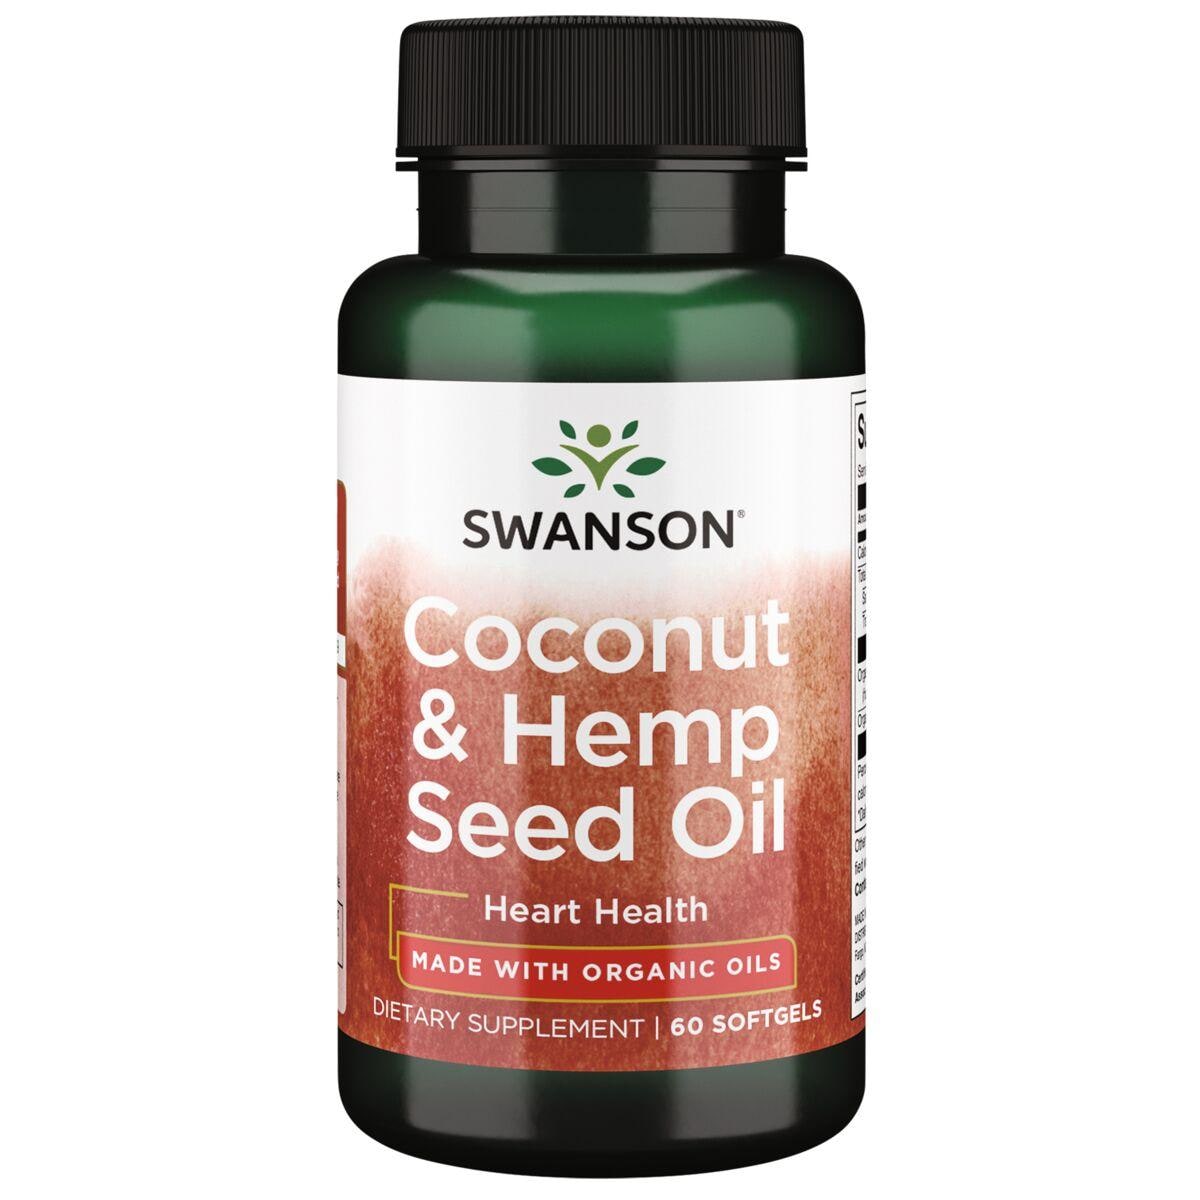 Swanson EFAs Coconut & Hemp Seed Oil - Made with Organic Oils Supplement Vitamin | 60 Soft Gels